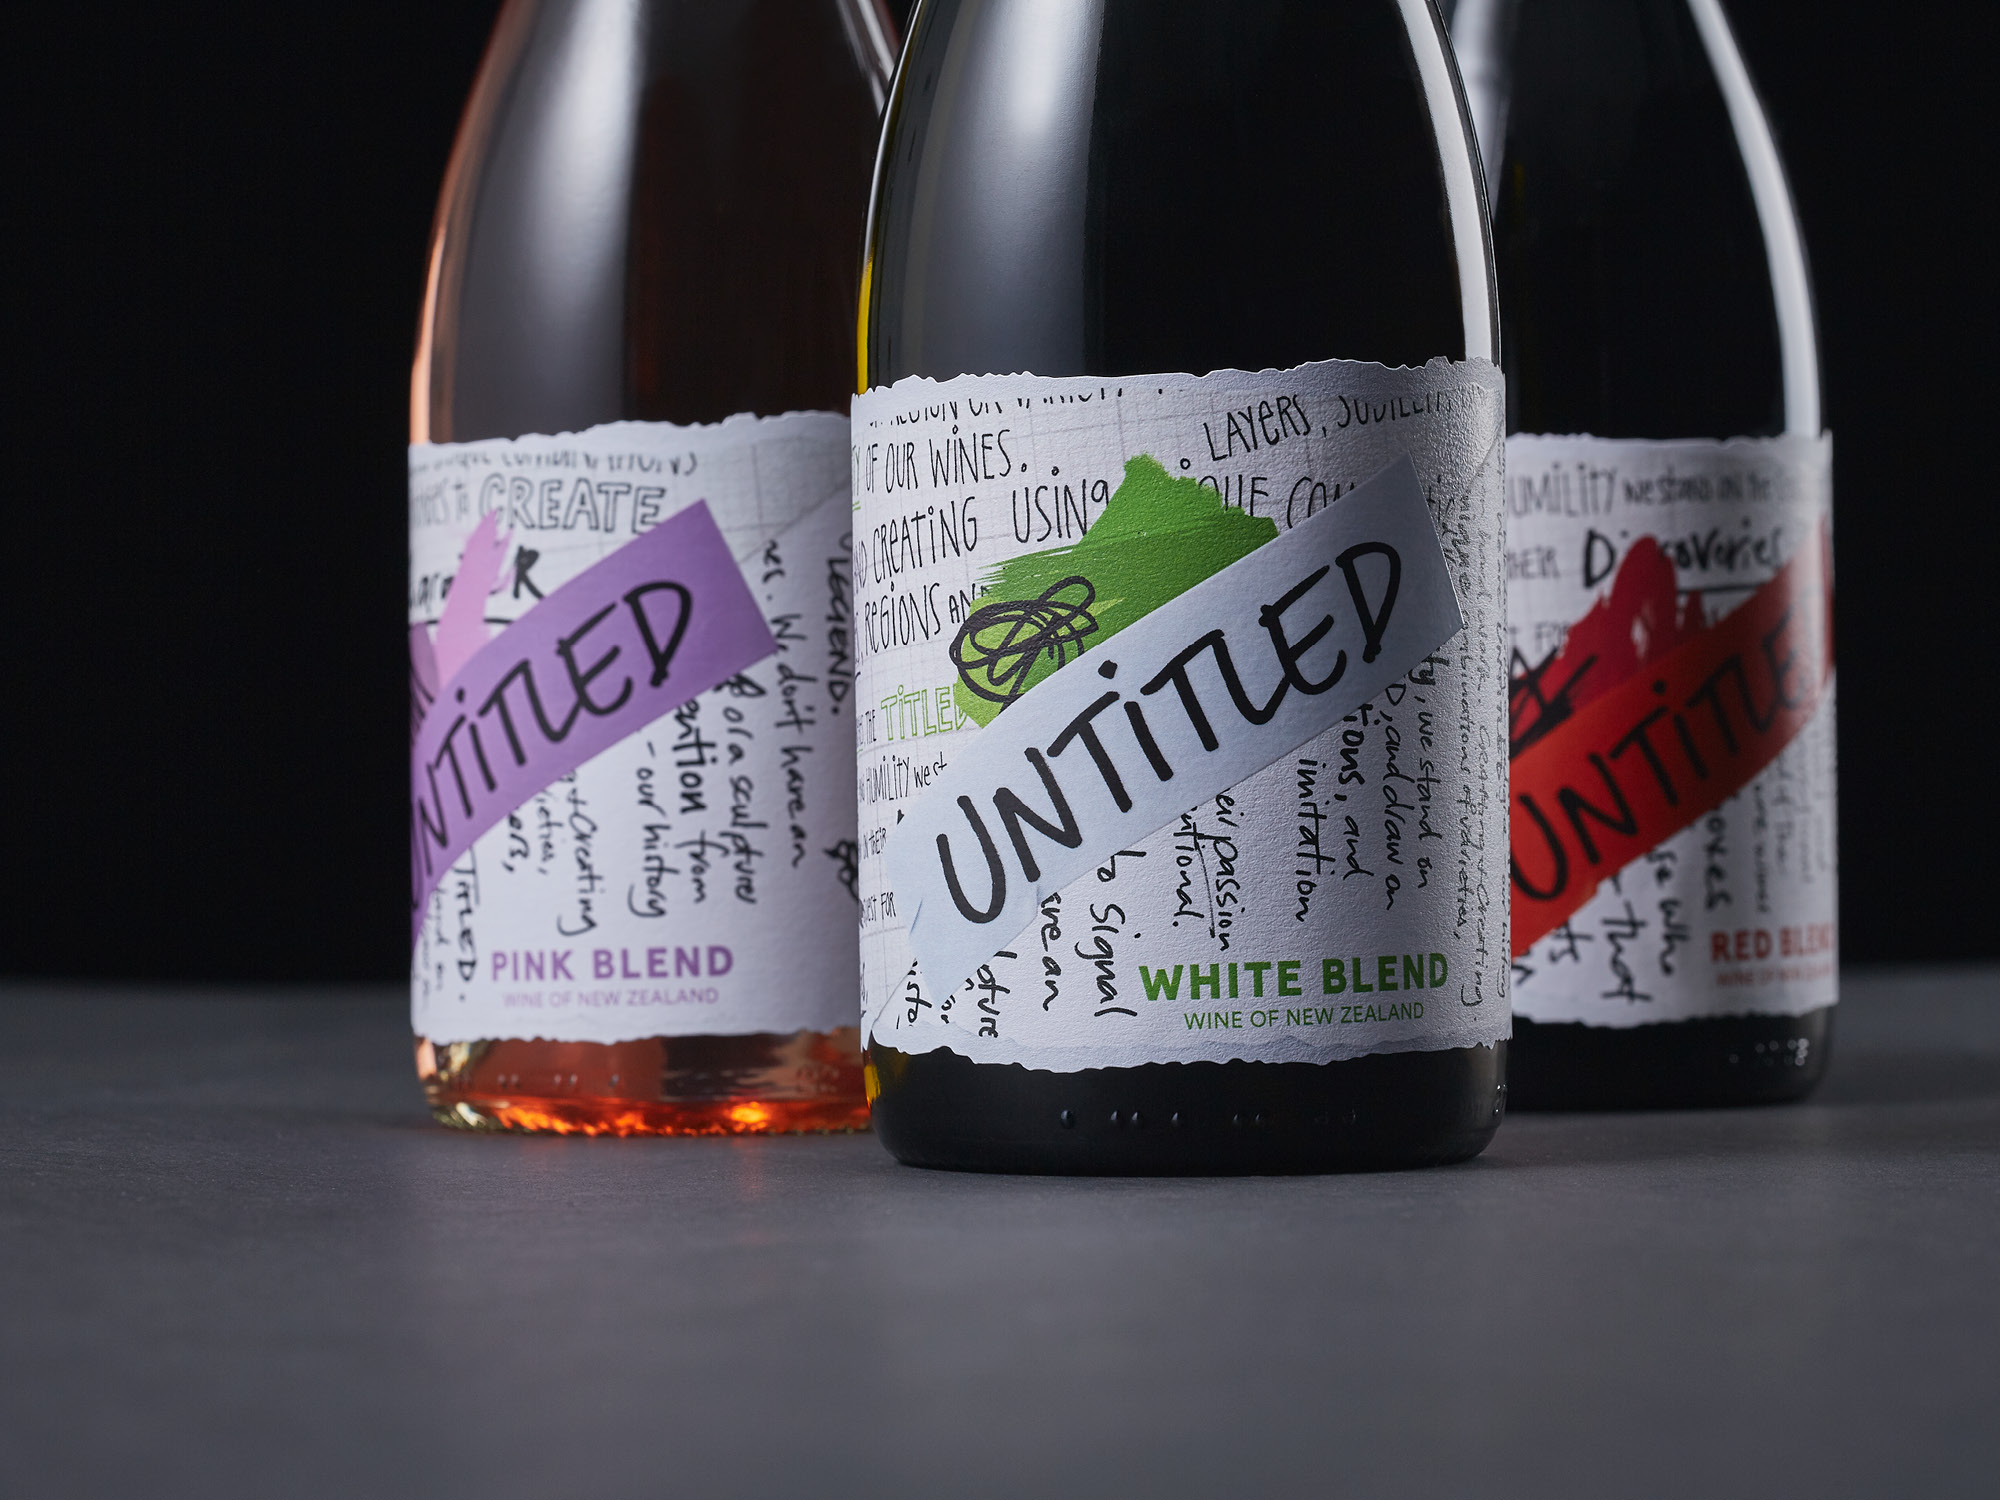 Traditionally Made Wine Making a Statement Against the Uniformity of existing Brands